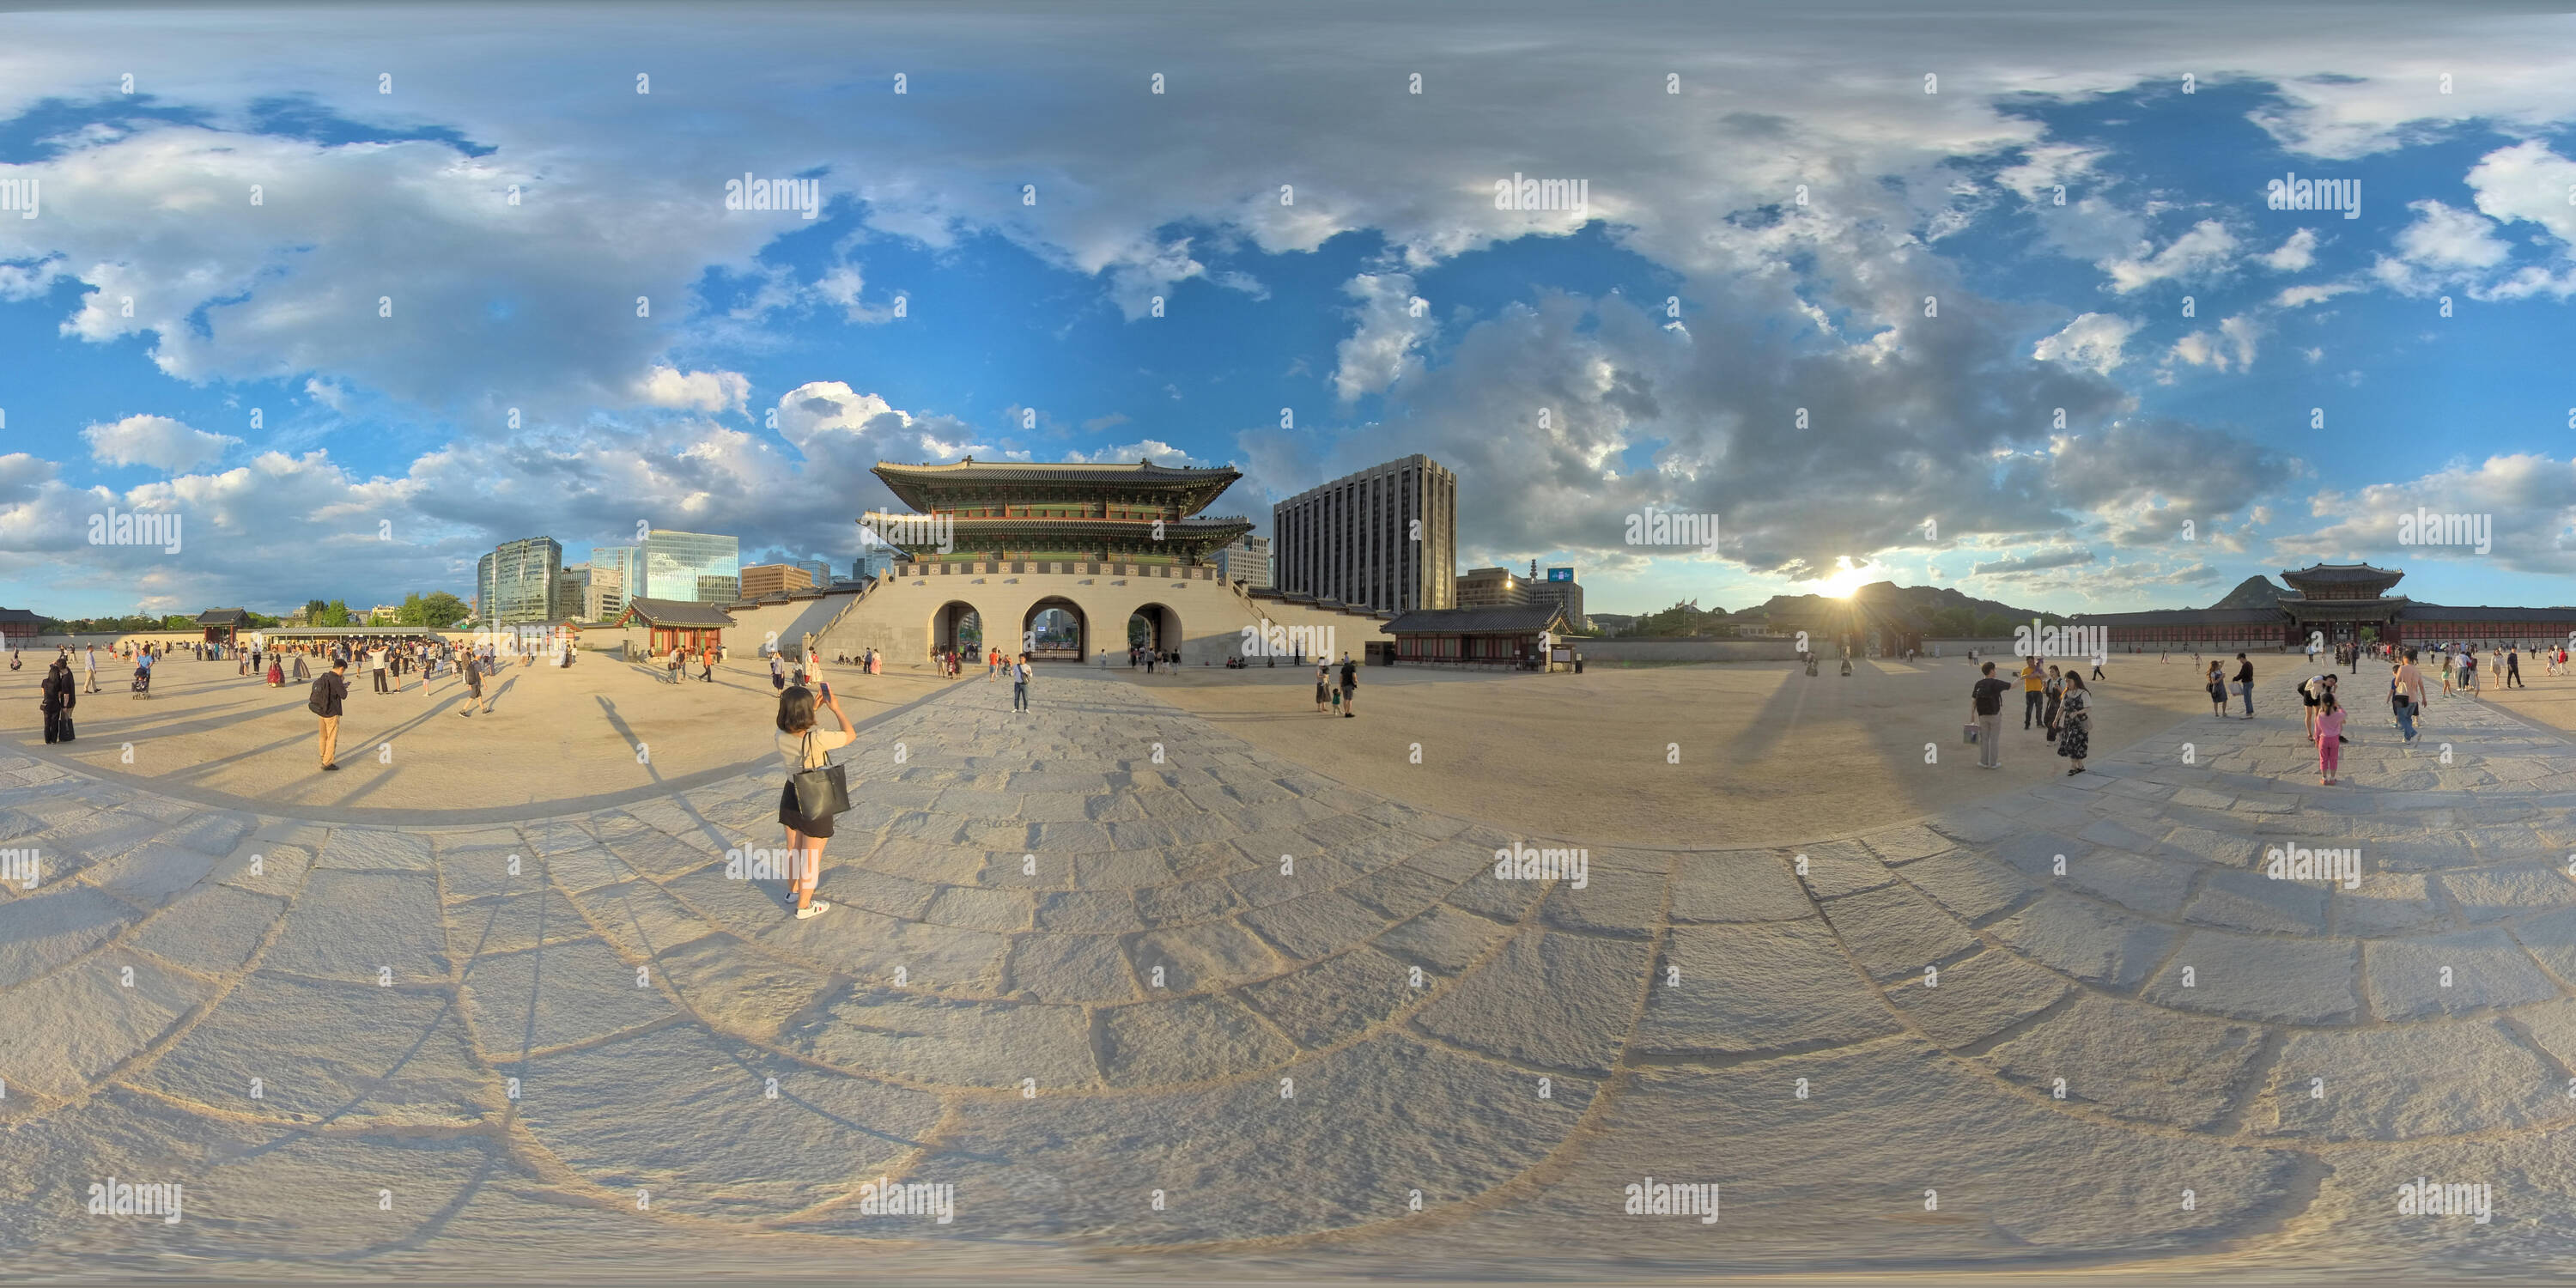 360 degree panoramic view of Seoul, South Korea - 22 June 2019 360 degrees panorama view of Gyeongbokgung Palace and City Center.